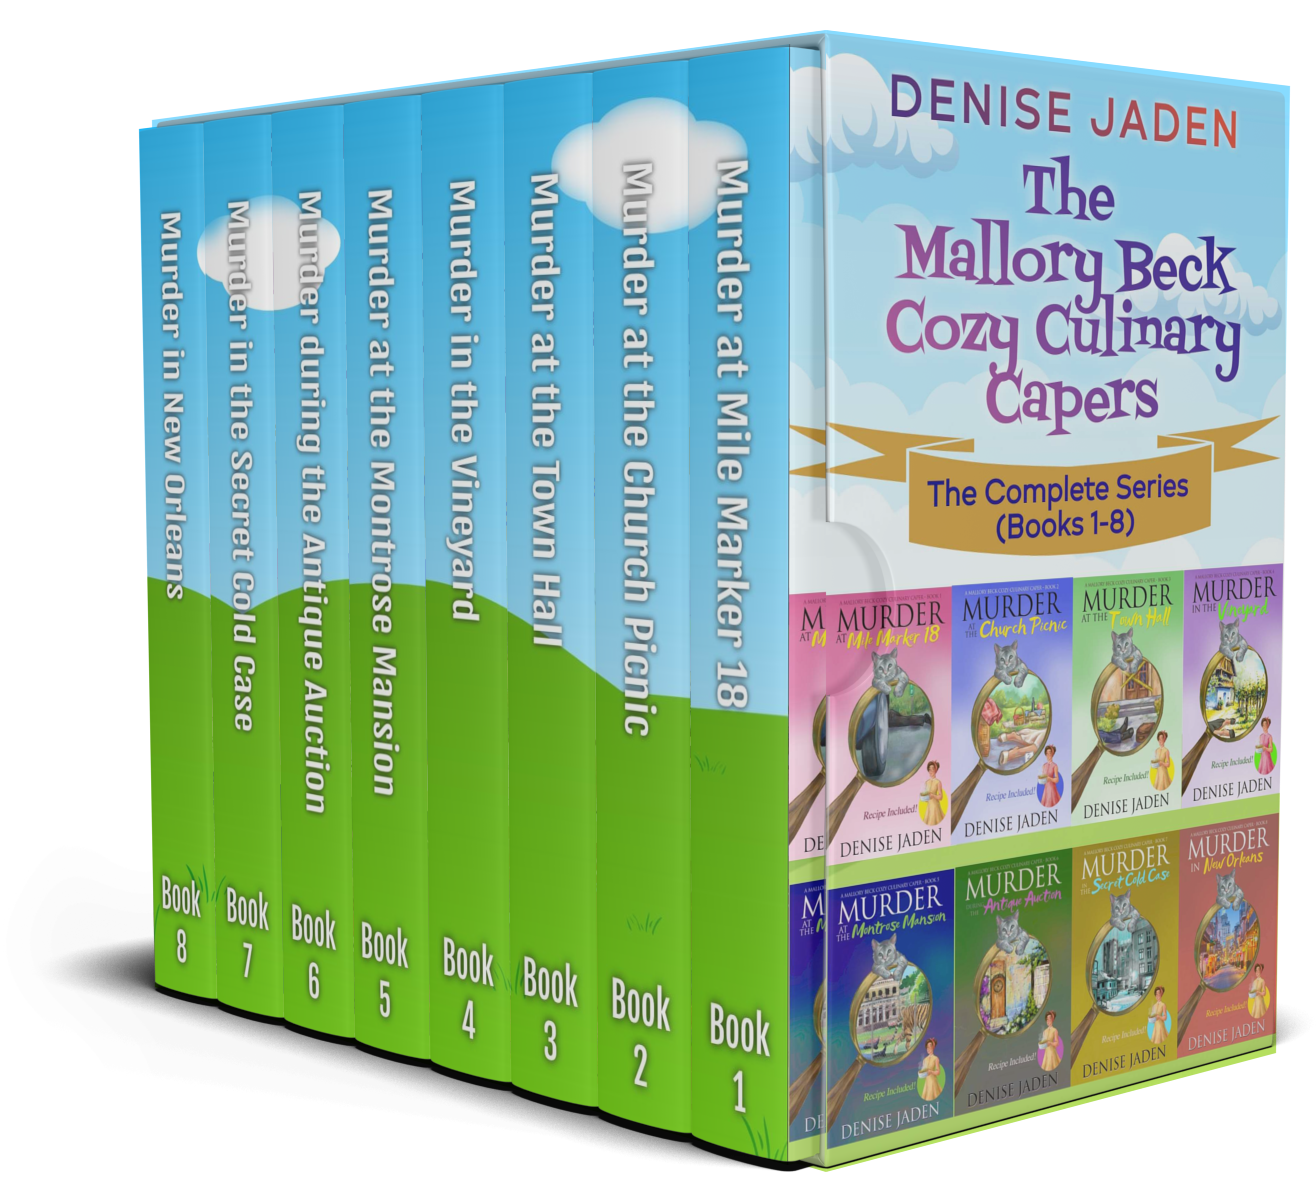 Large Print! Mallory Beck Cozy Culinary Capers Paperback Book Bundle  ⭐⭐⭐⭐⭐ 4.5 (1689ratings)